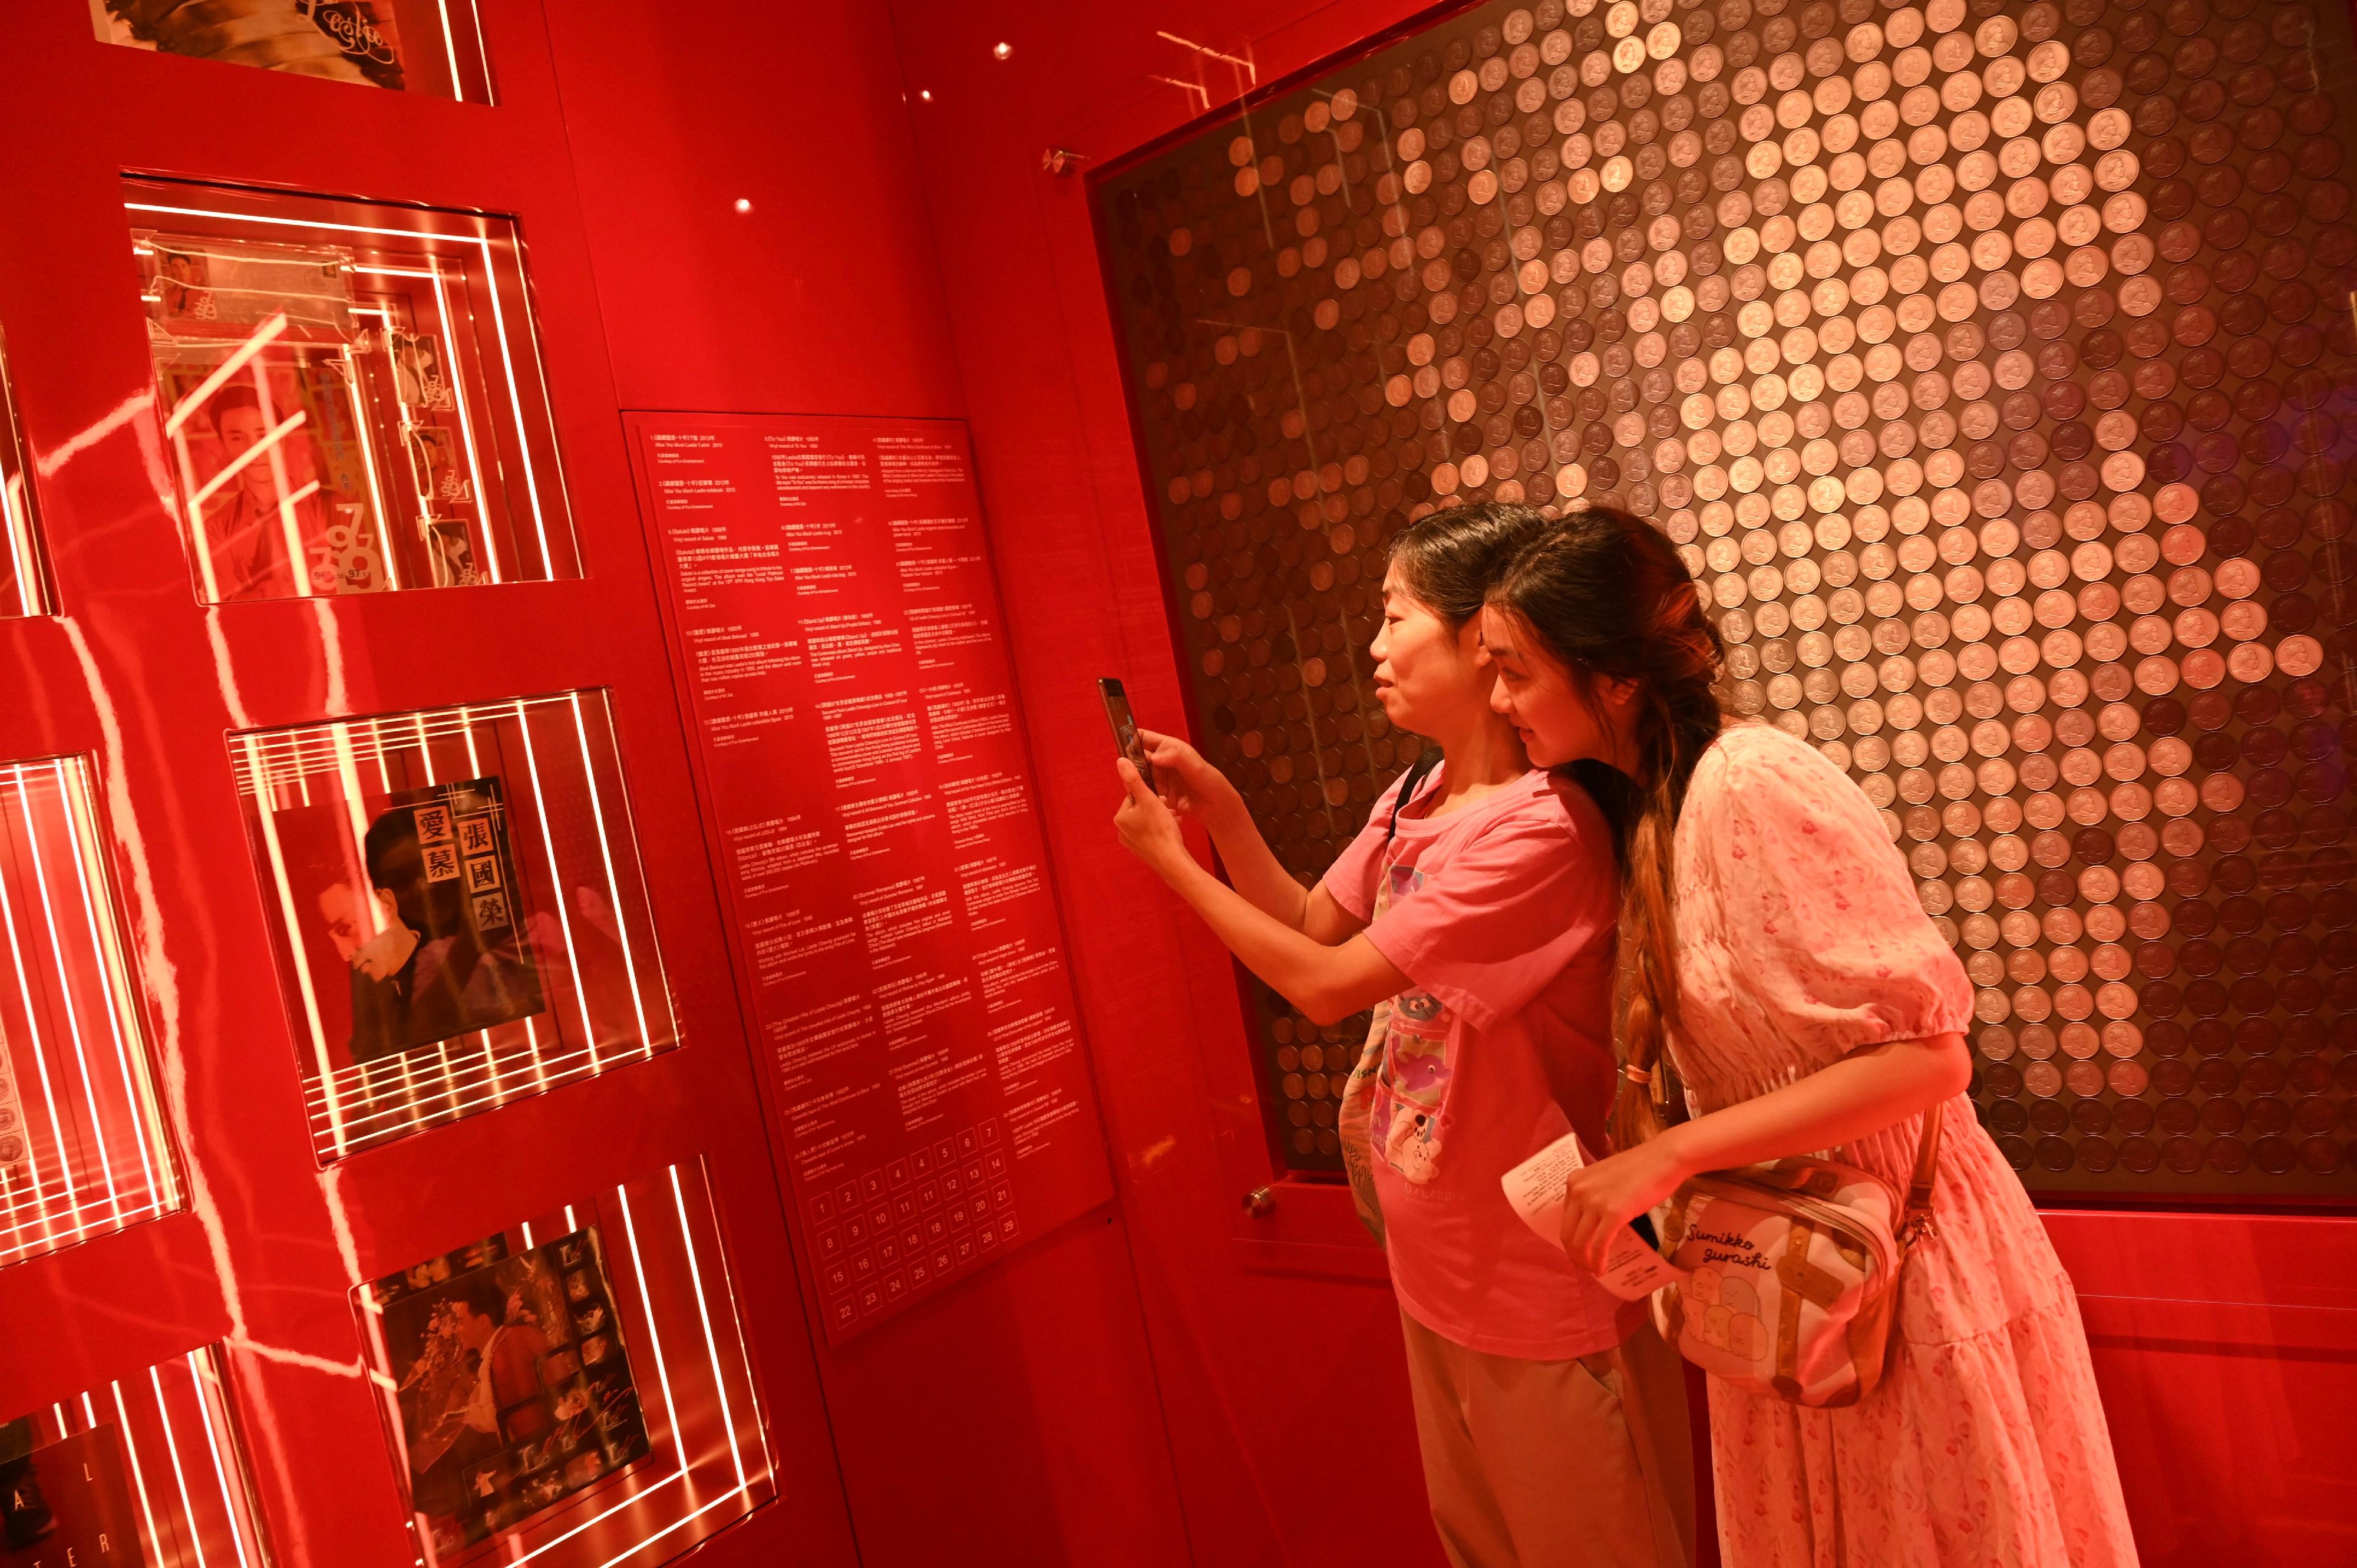 Hong Kong Heritage Museum's "Miss You Much Leslie Exhibition" has received overwhelming public response since its opening. The exhibition received its 300 000th visitor today (August 13). Photo shows visitors touring inside the exhibition.